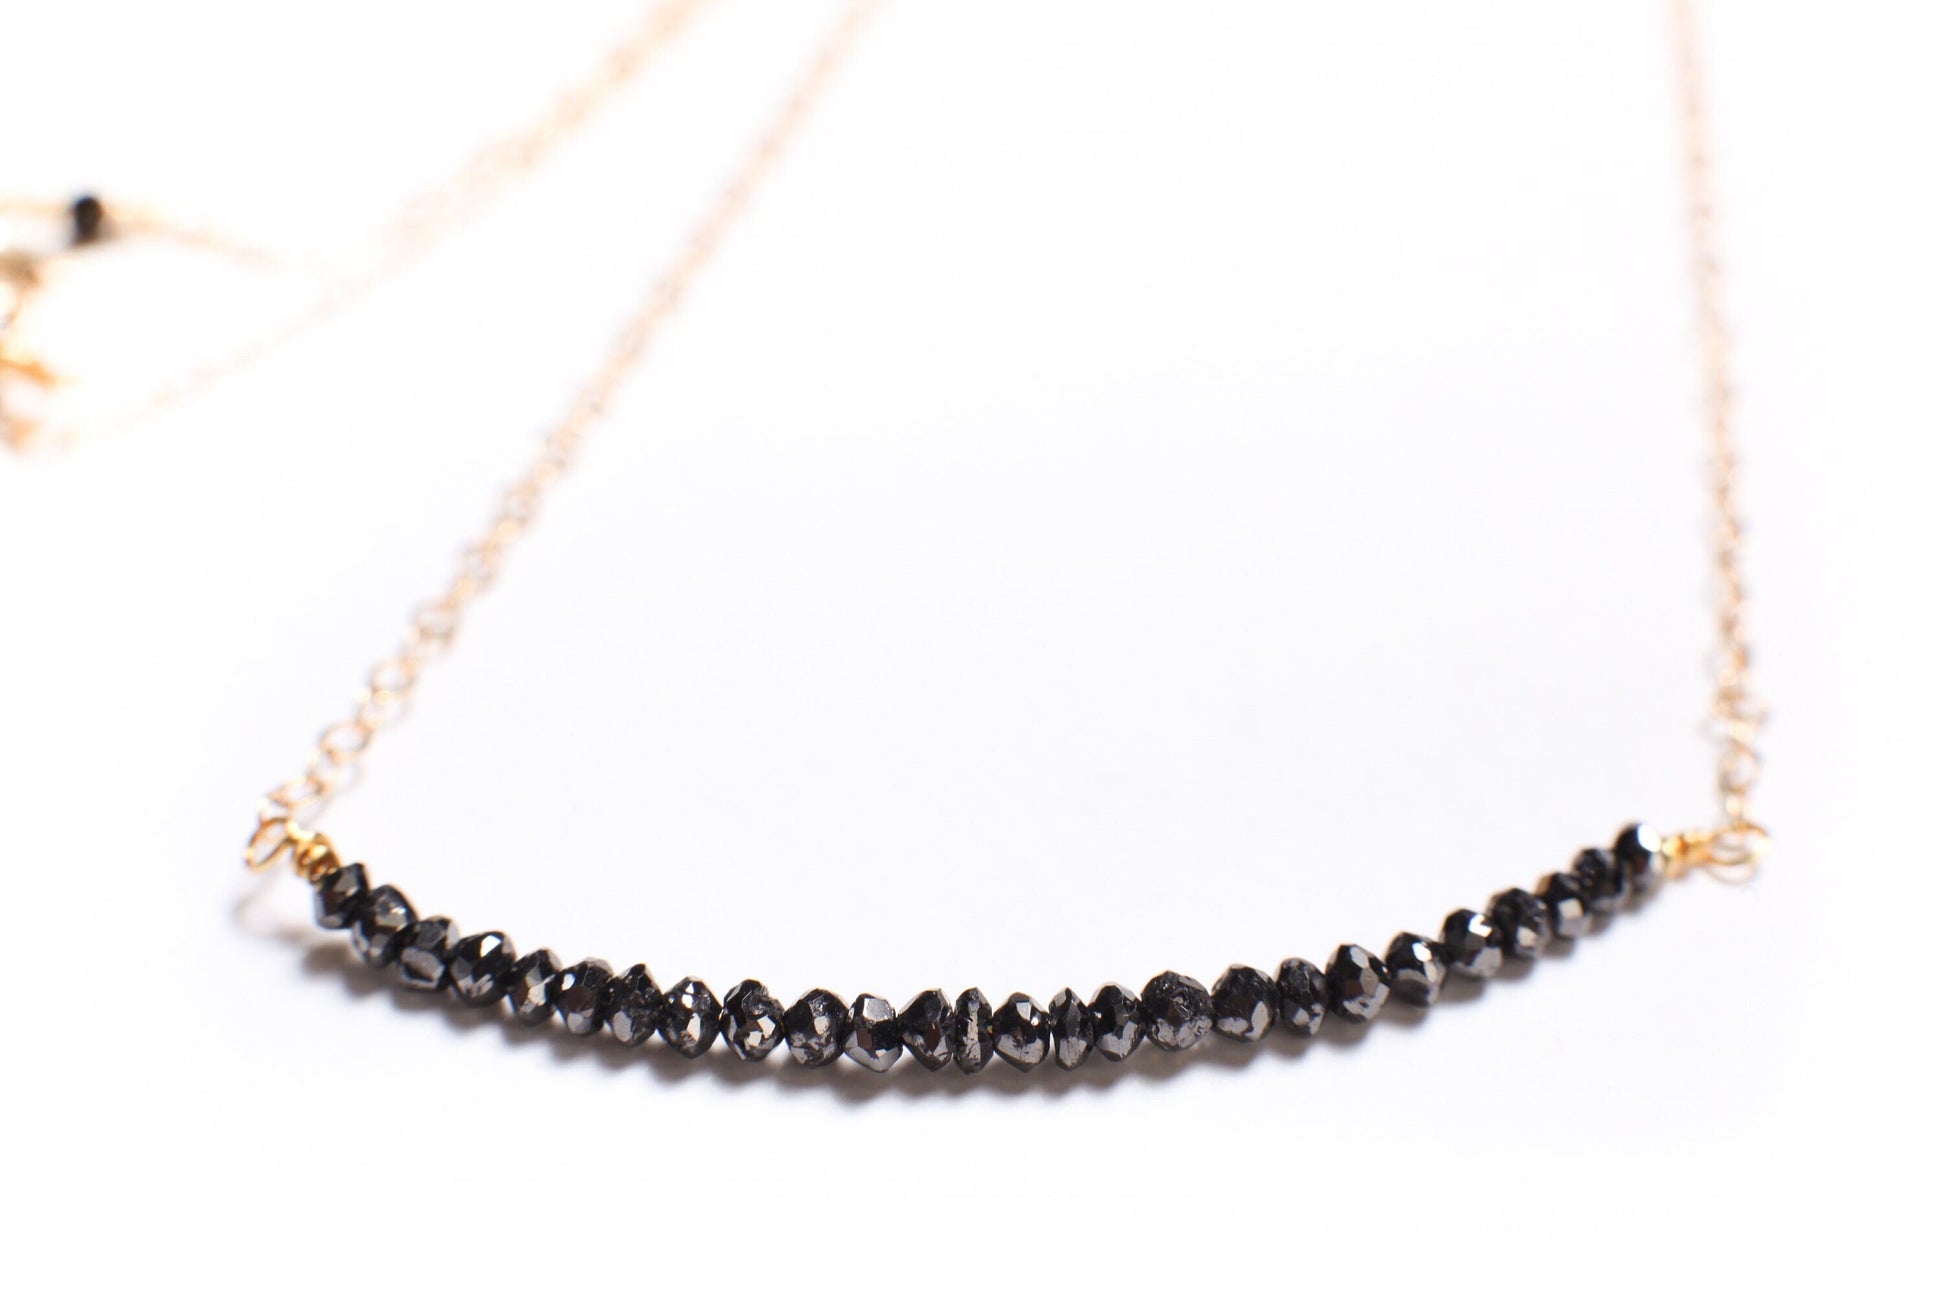 Natural Black Diamond Faceted 2mm Roundel in 14K Gold Filled or 925 Sterling Silver Bar Necklace, Precious Gift For her, healing gems.